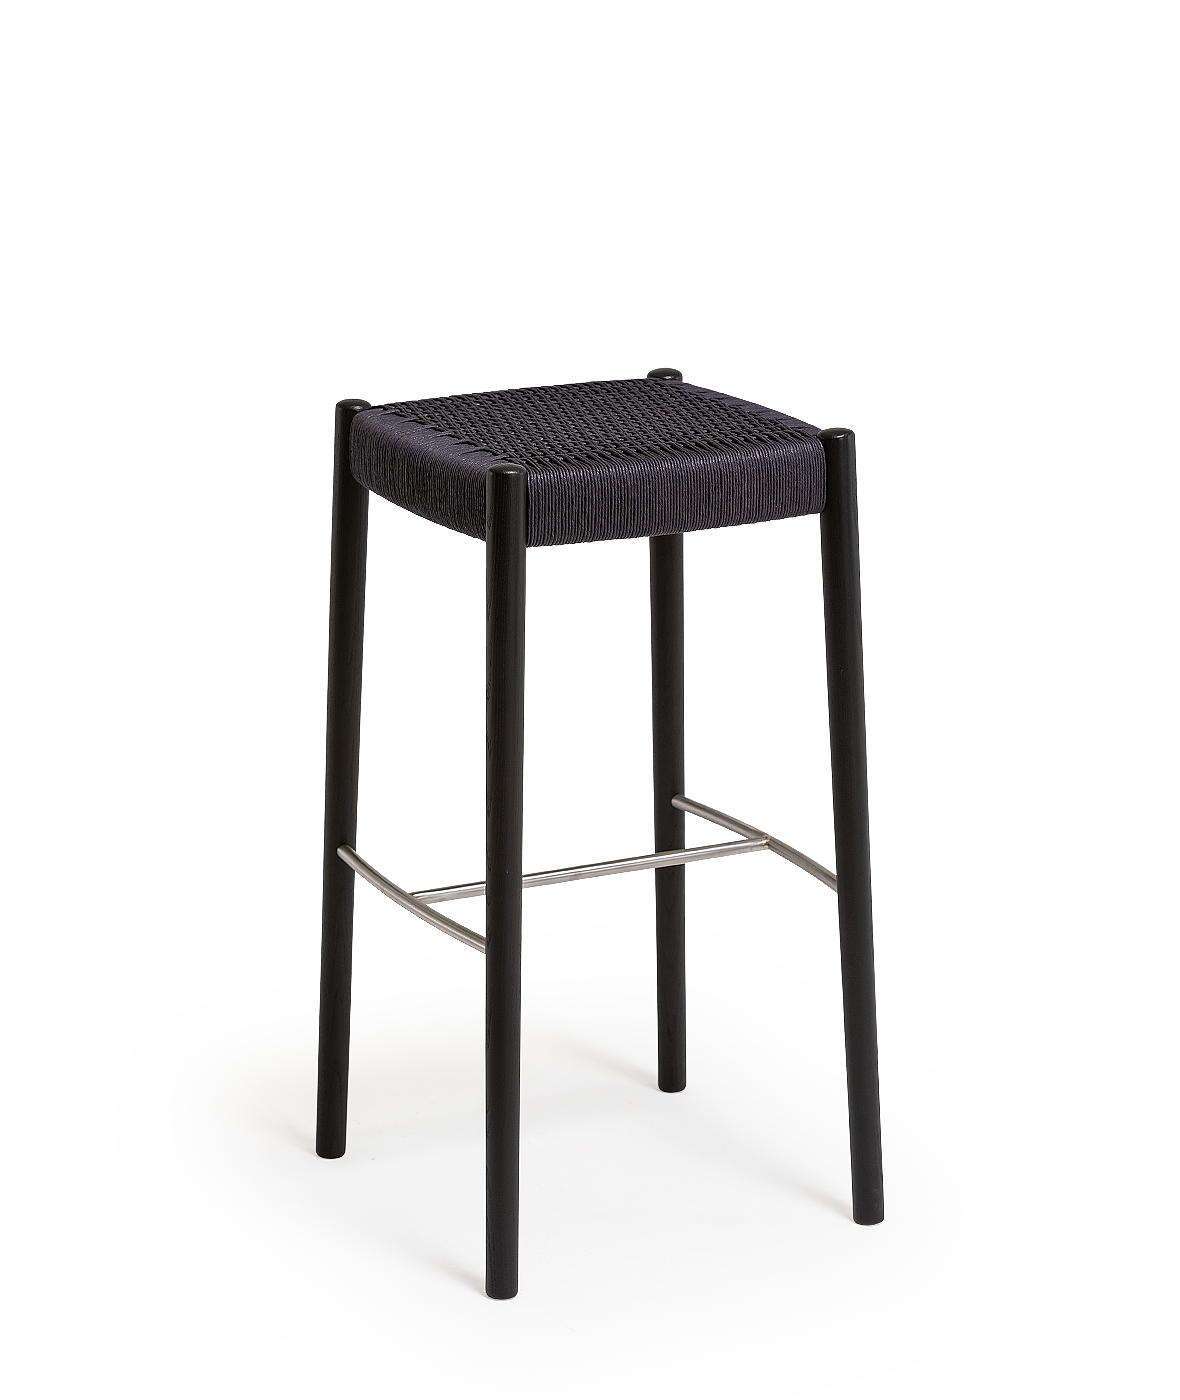 Vergés - Bogart Stool with braided rope seat